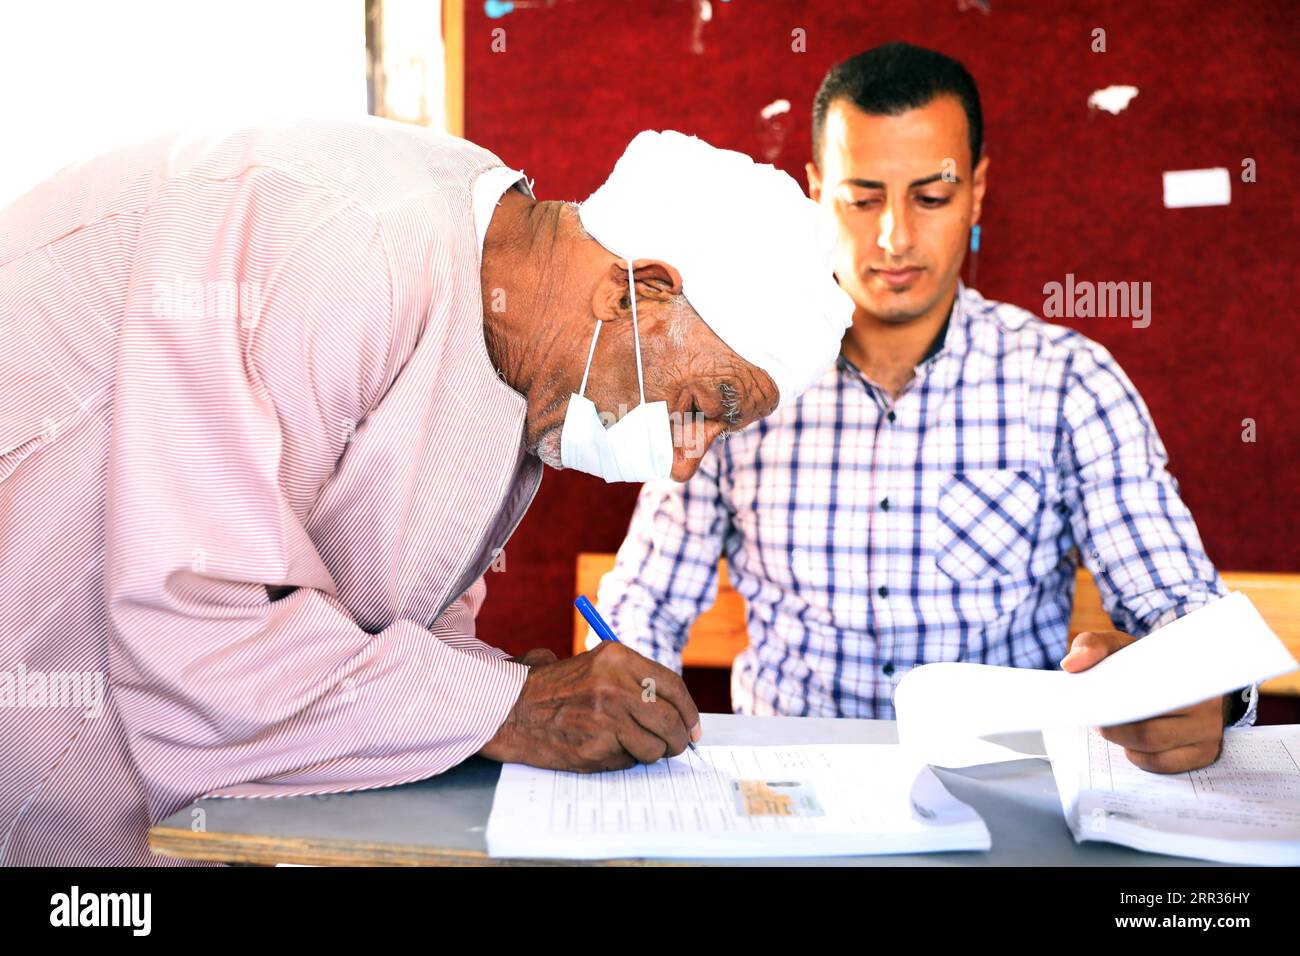 201025 -- HURGHADA, Oct. 25, 2020 -- A man registers for a vote at a polling station in Hurghada, Egypt, on Oct. 24, 2020. The two-day first stage of Egypt s parliamentary elections began on Saturday in 14 provinces including Giza, Alexandria, the Red Sea, Luxor and Aswan, amid tight security measures and precautions against COVID-19 pandemic.  EGYPT-HURGHADA-PARLIAMENTARY ELECTIONS AhmedxGomaa PUBLICATIONxNOTxINxCHN Stock Photo